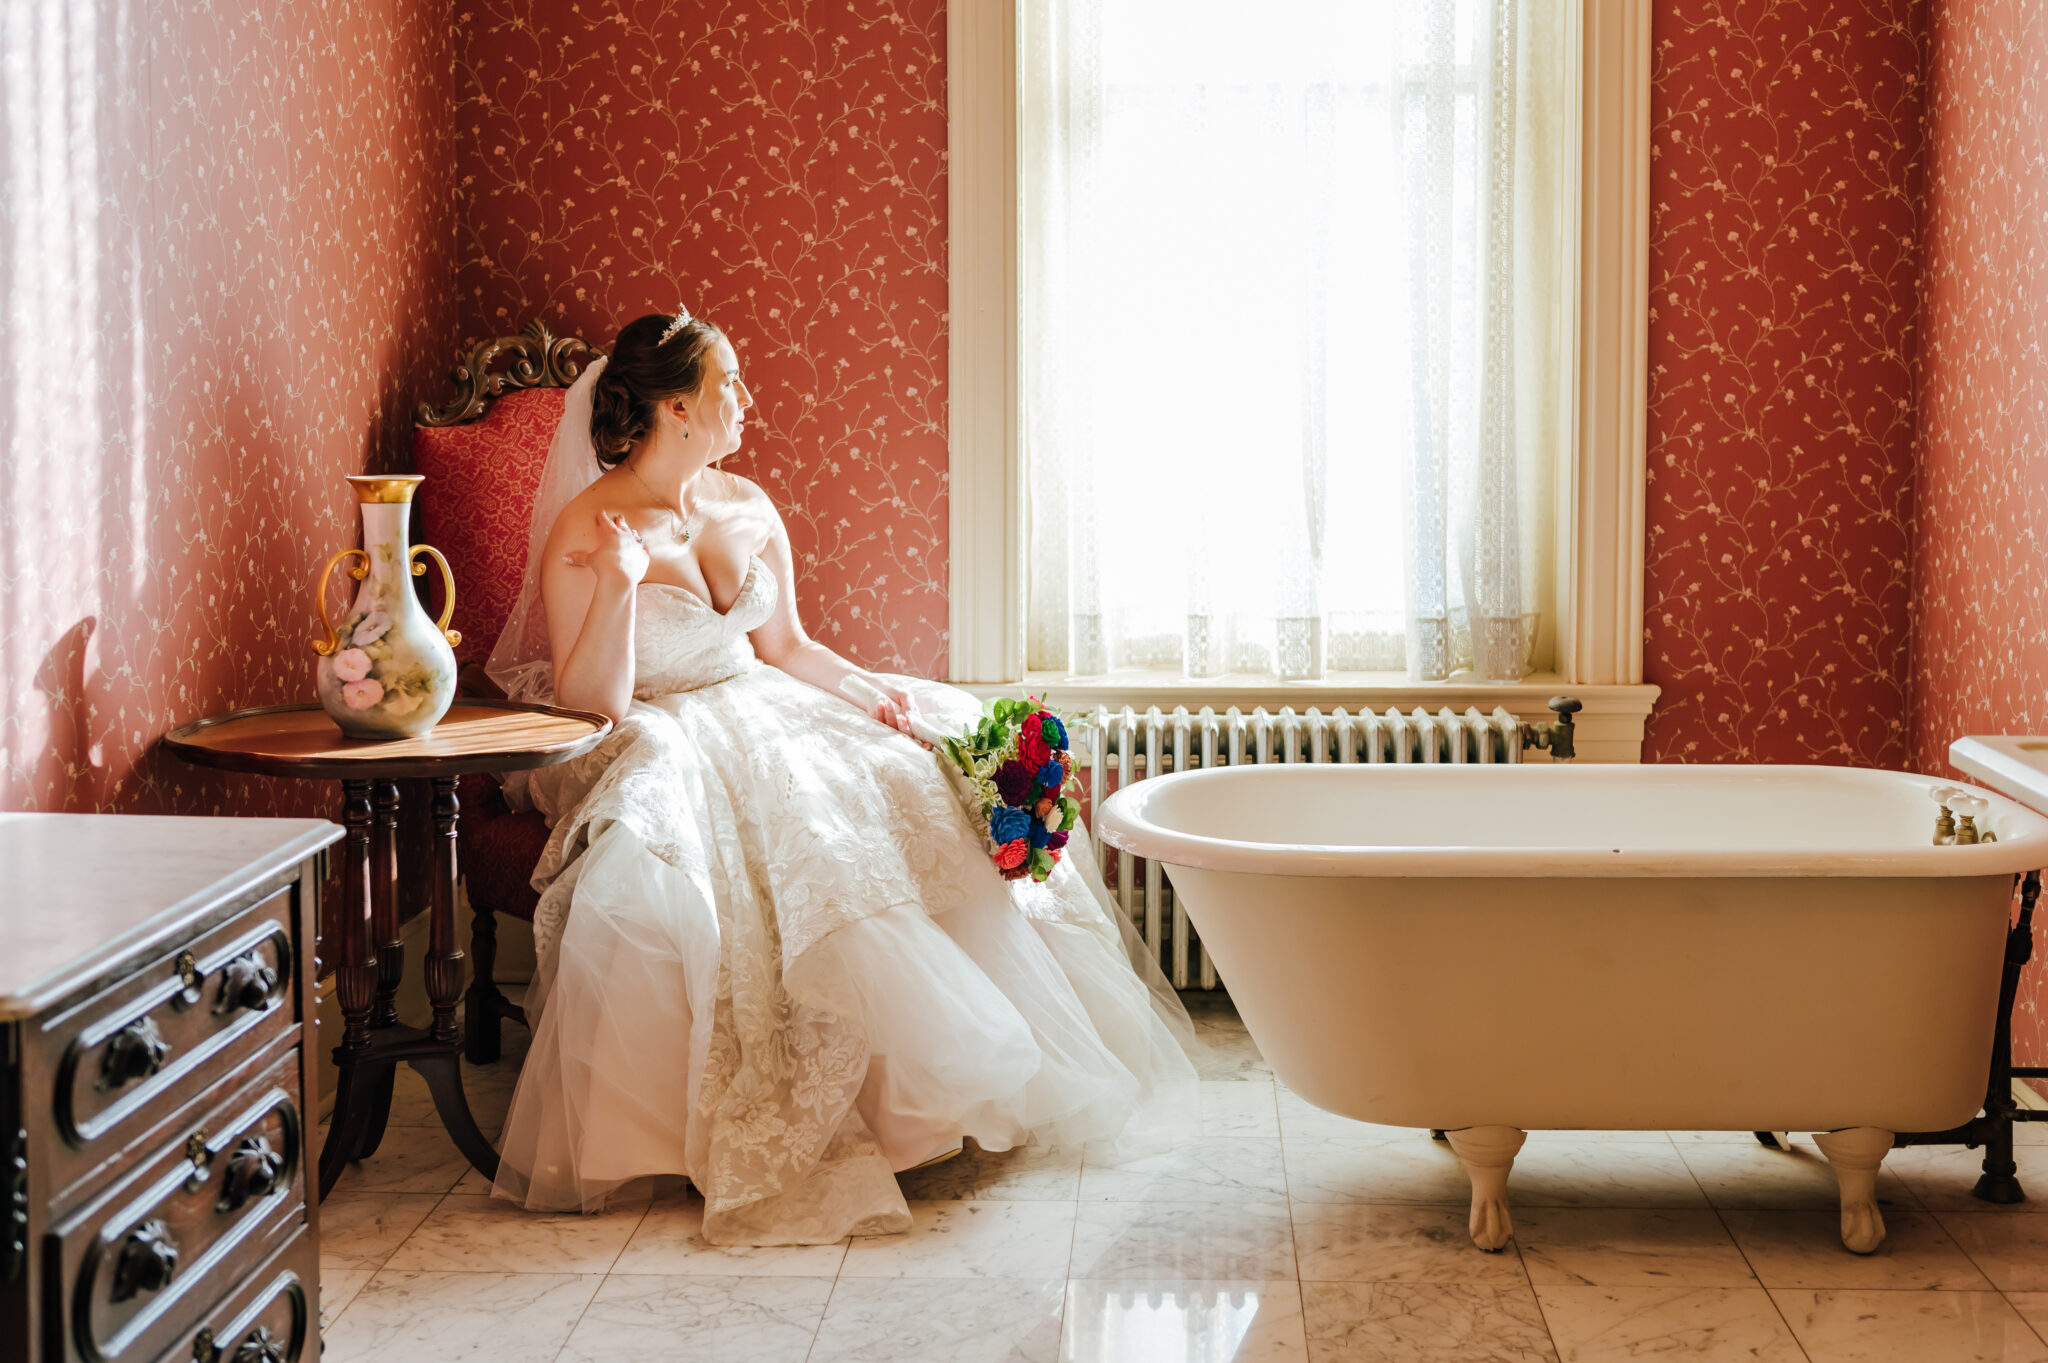 A bride sits in an elegant chair in a historic bathroom with pink wallpaper. She gazes out the window.